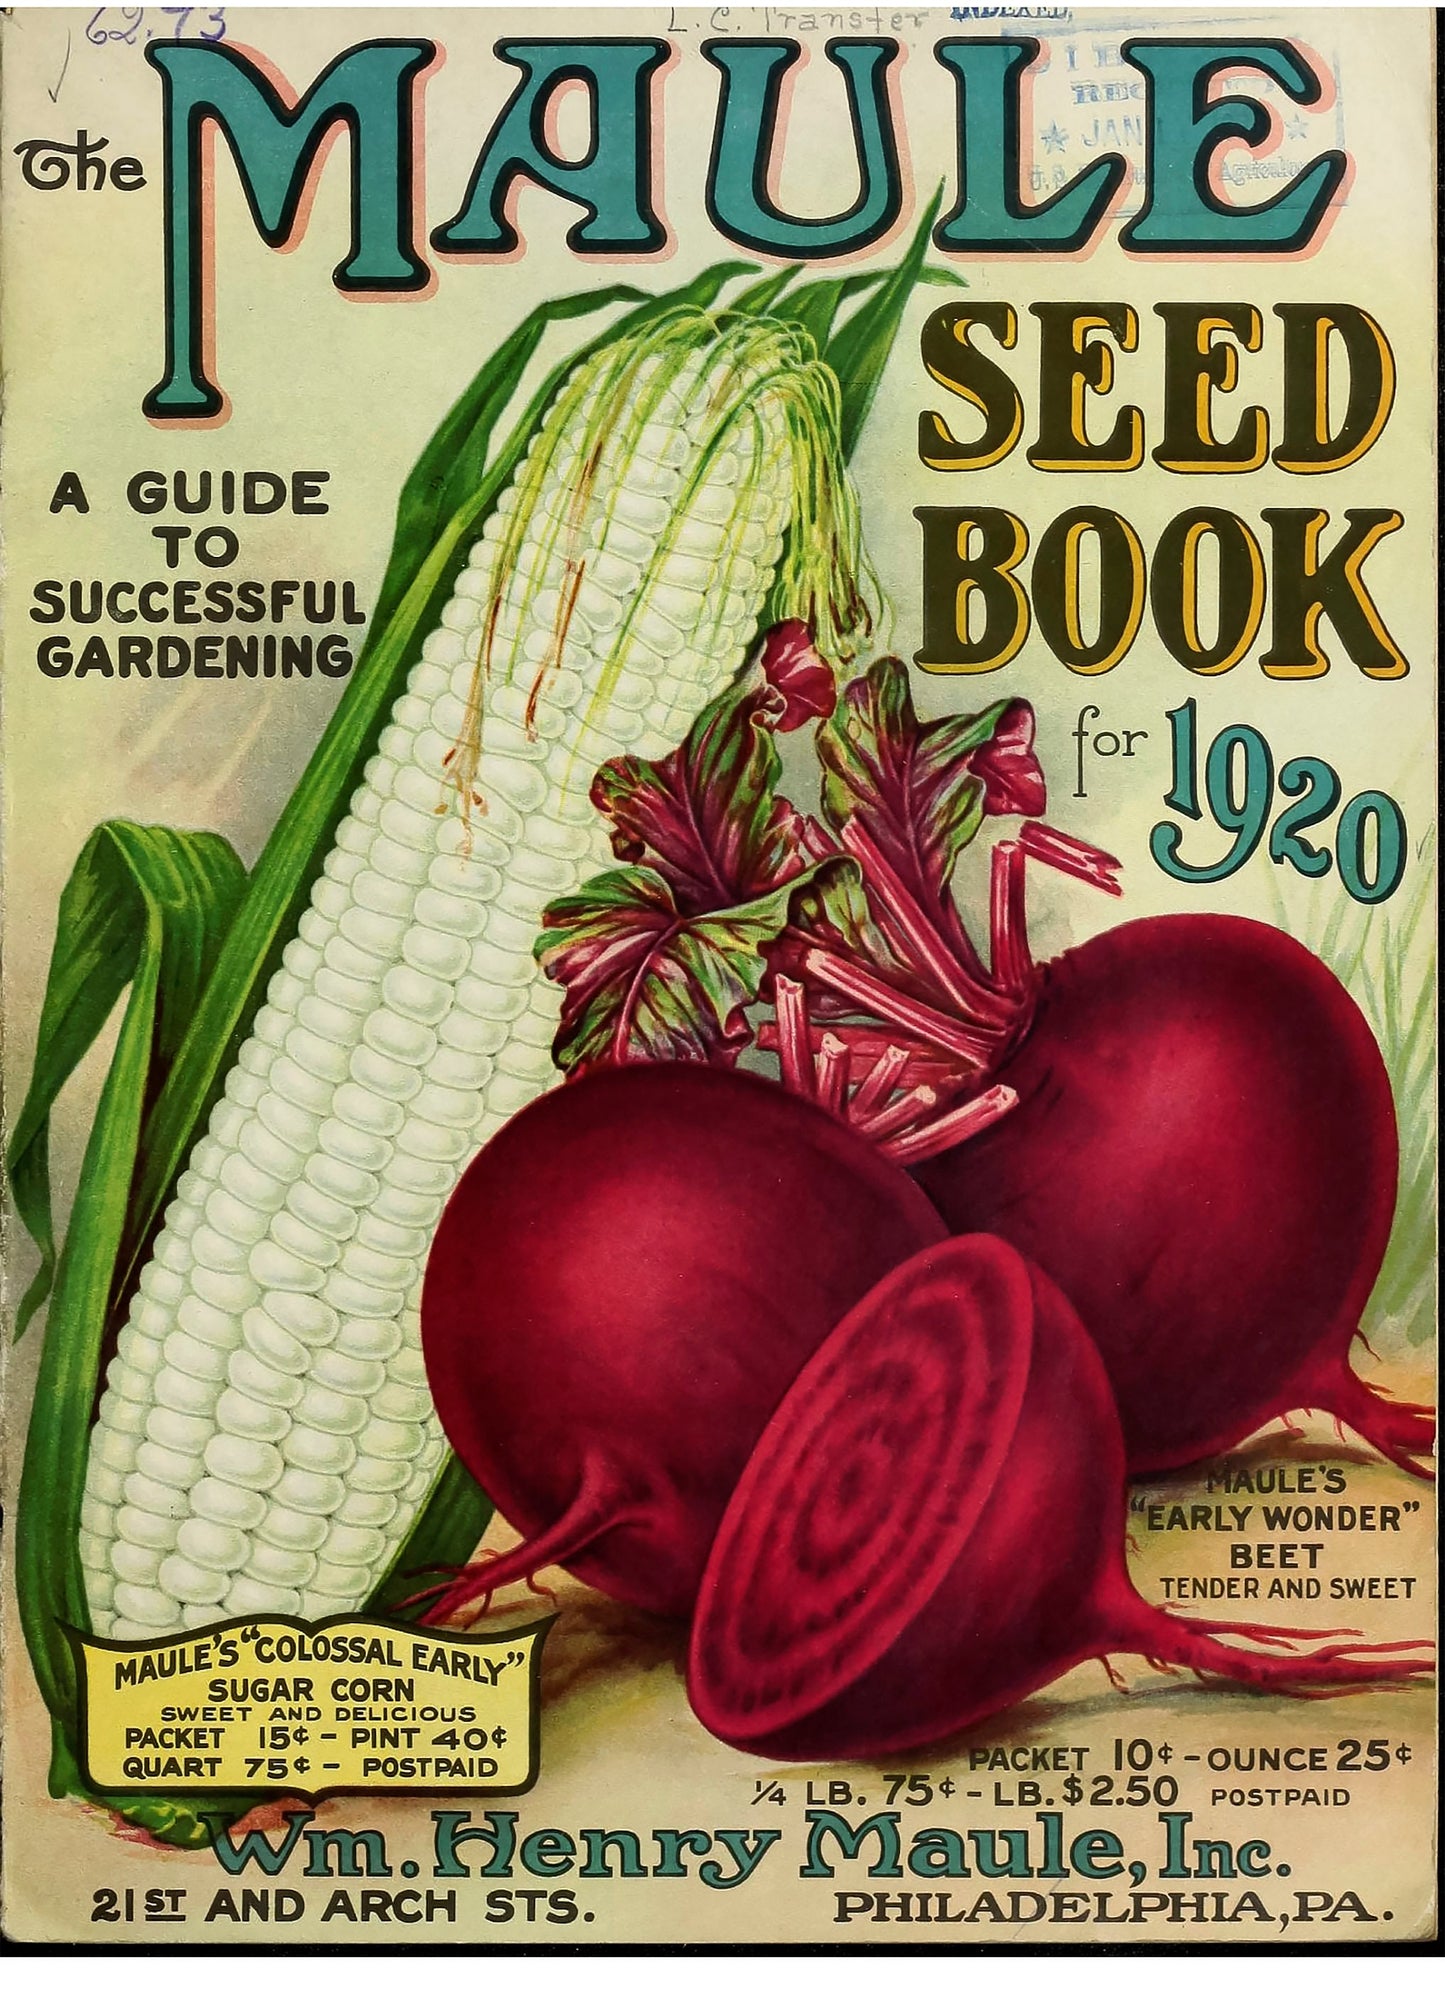 Vintage Seed Catalogue Covers Set 2 [72 Images]